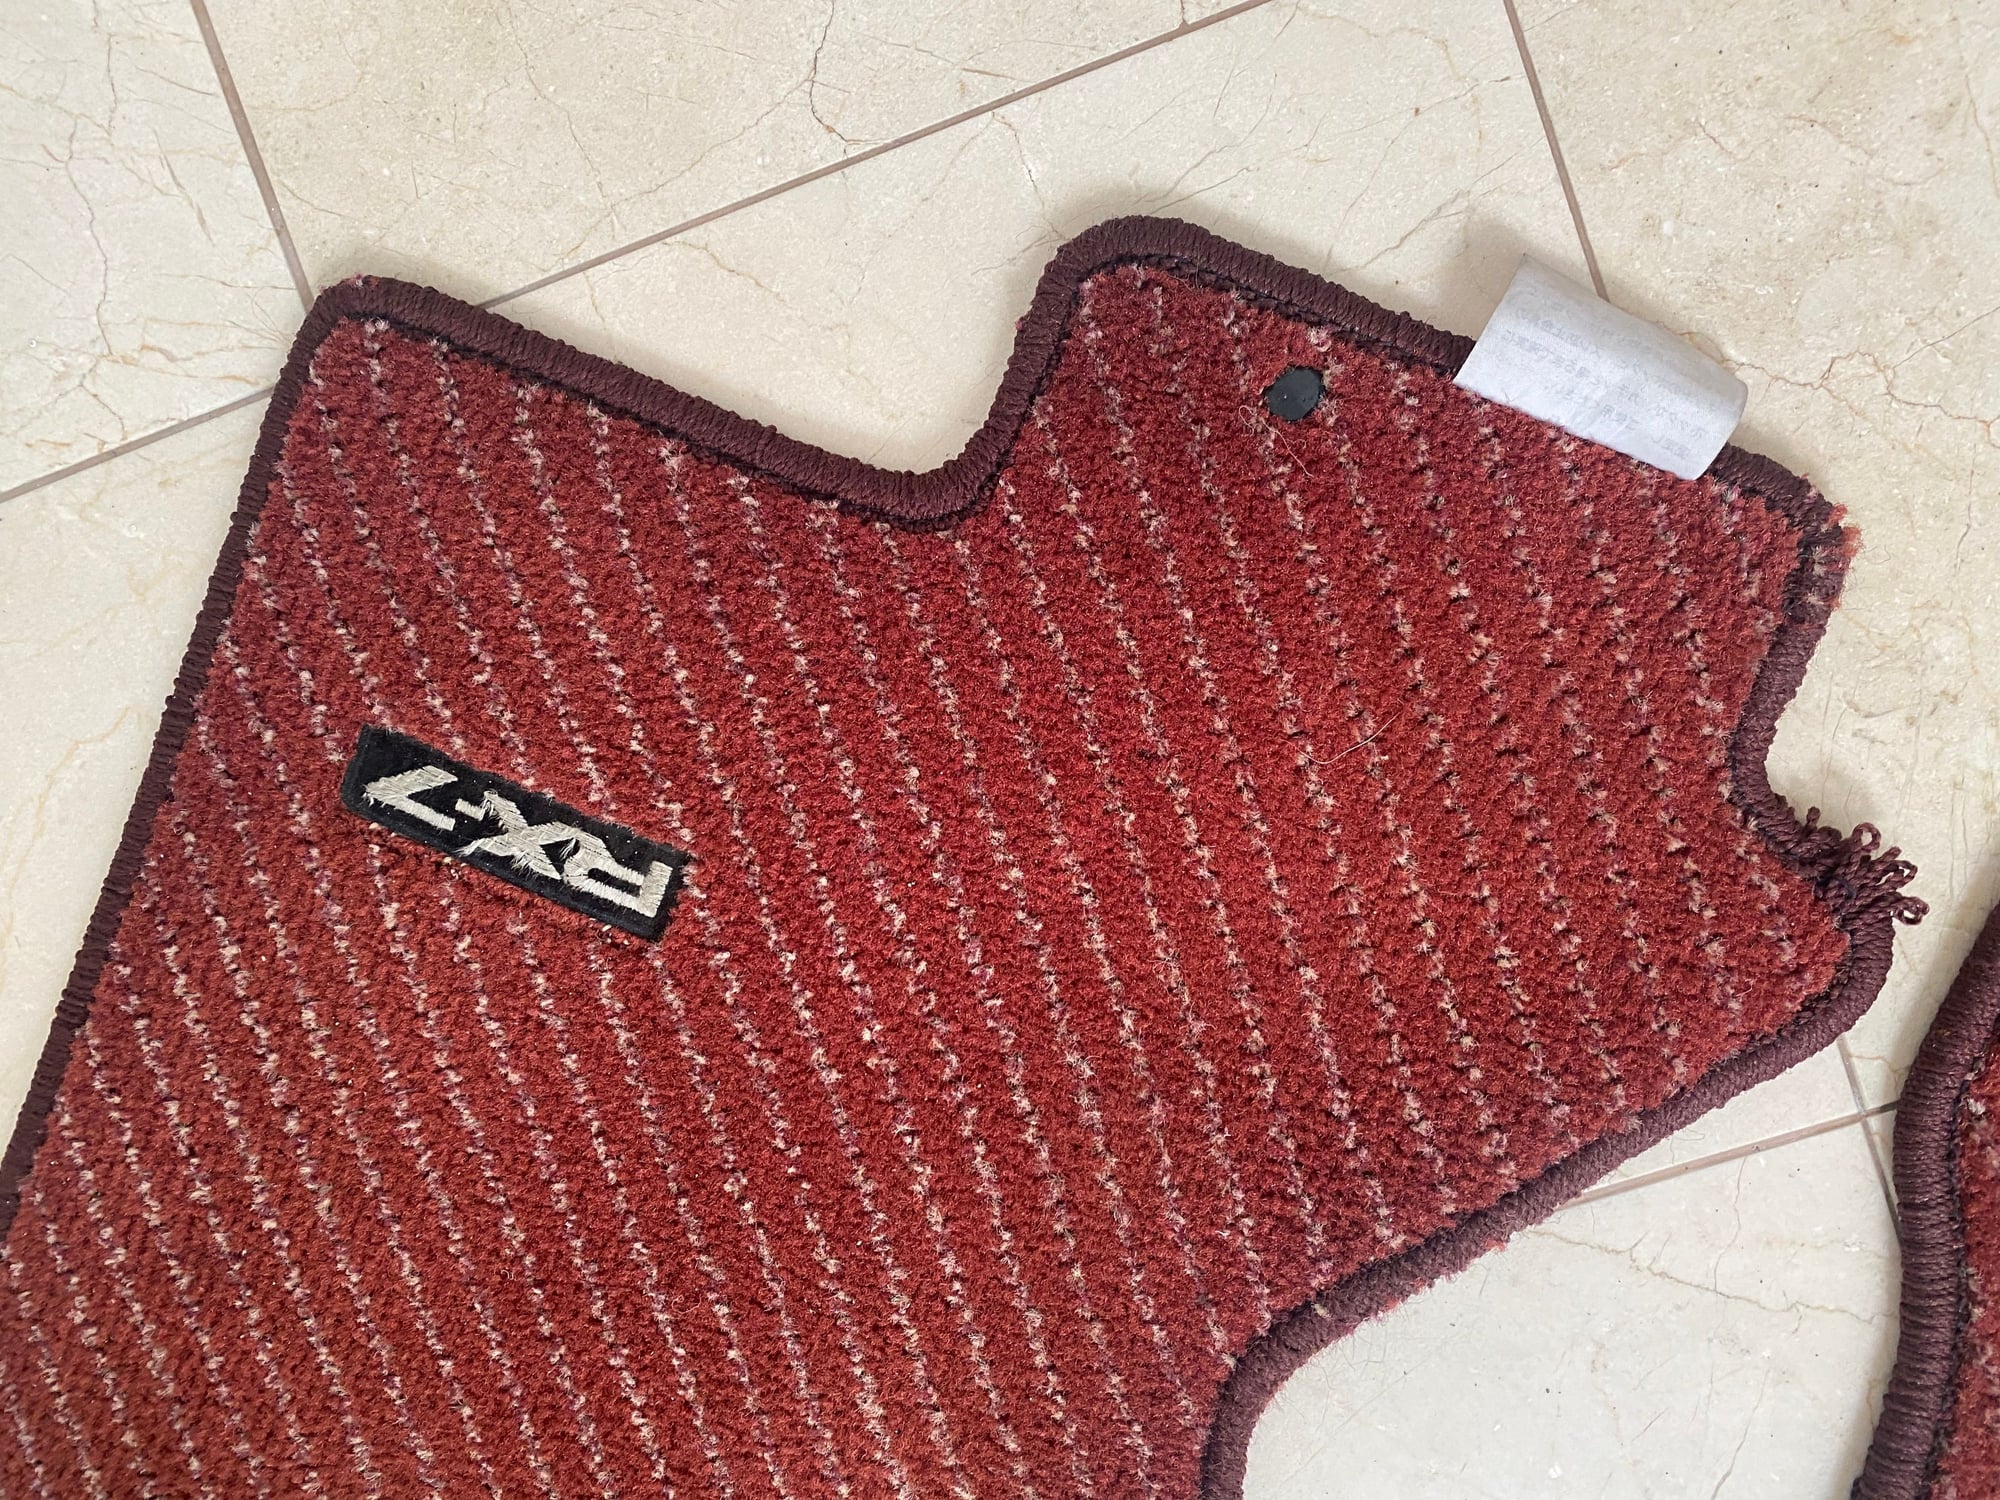 Interior/Upholstery - Red floor mats - Used - 1993 to 2001 Mazda RX-7 - Chicago, IL 60647, United States